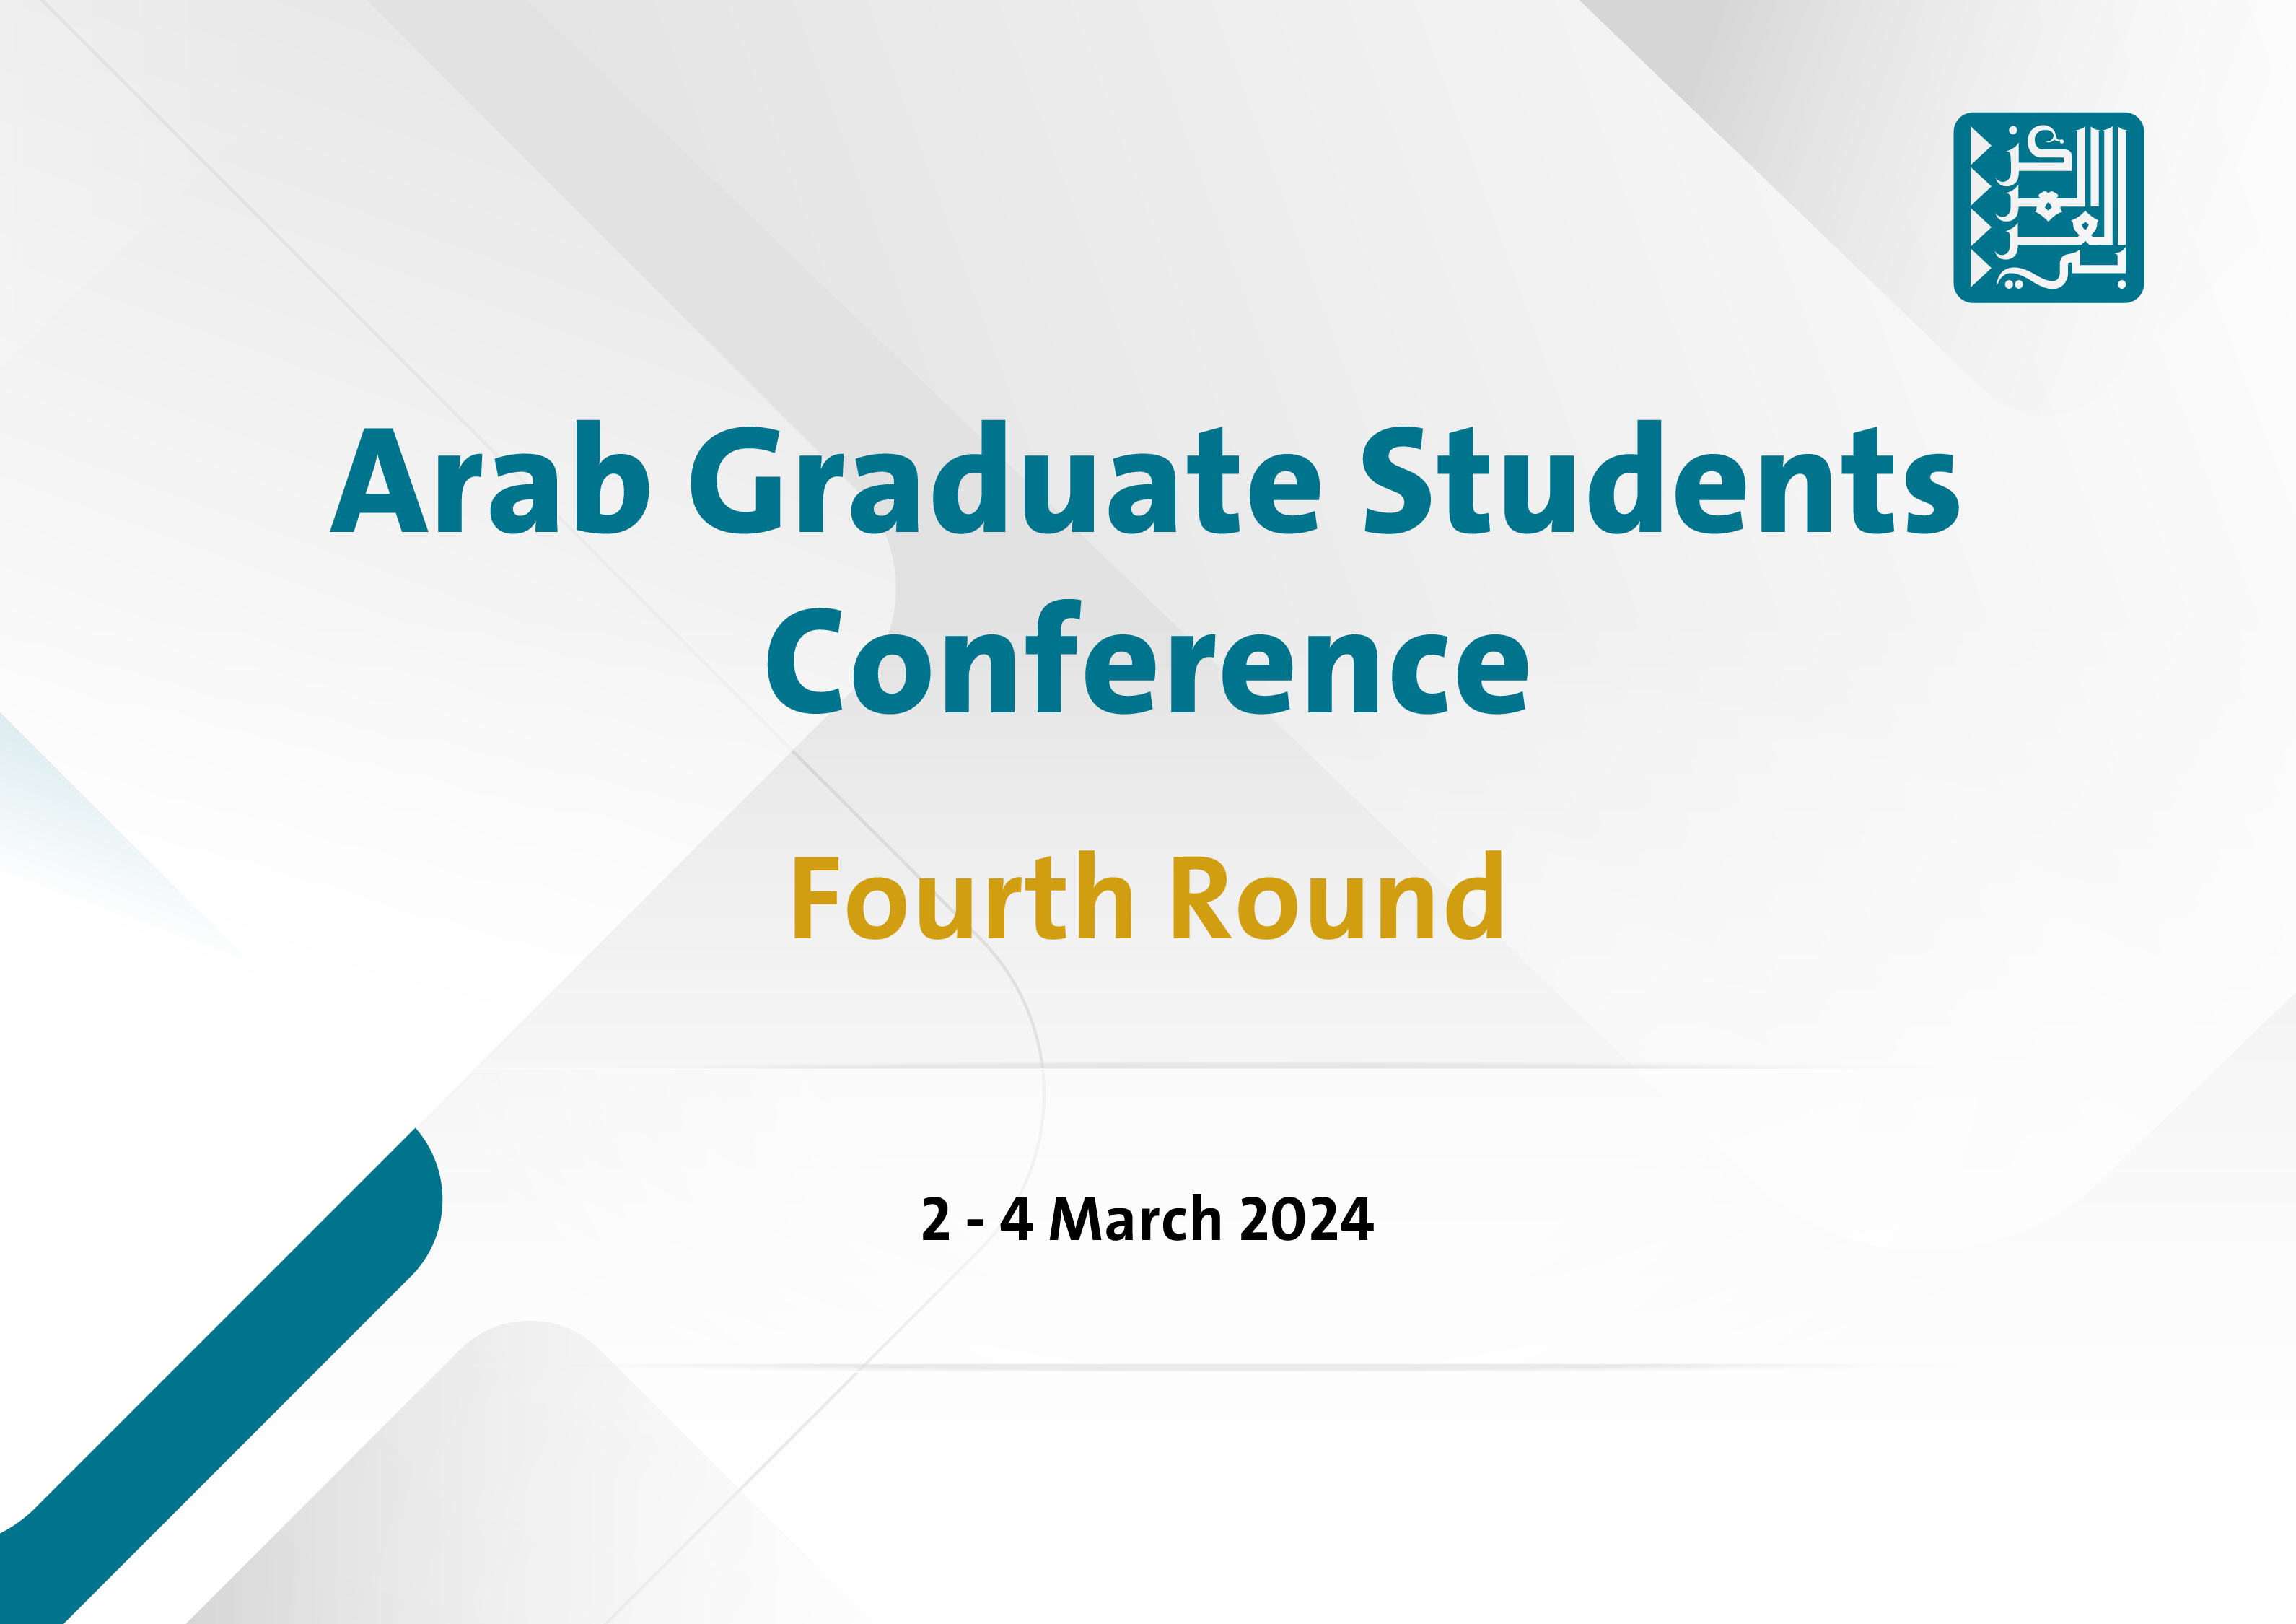 67 PhD Students and Recent Graduates to Discuss their Research at the Arab Graduate Students Conference